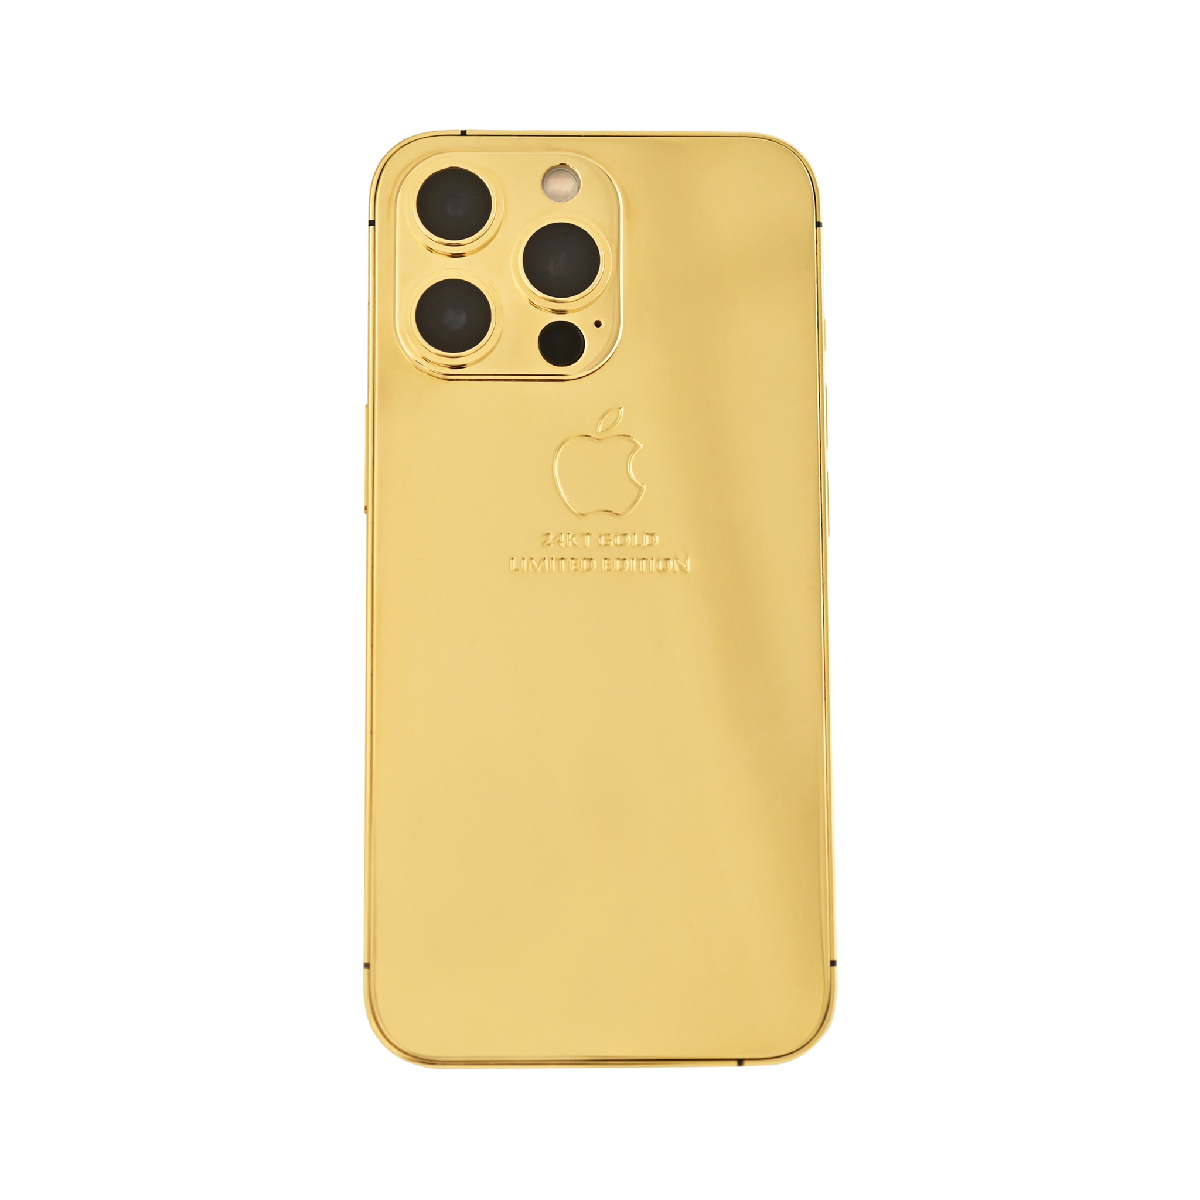 Caviar Luxury 24k Full Gold Customized iPhone 14 Pro Max 512 GB Limited Edition